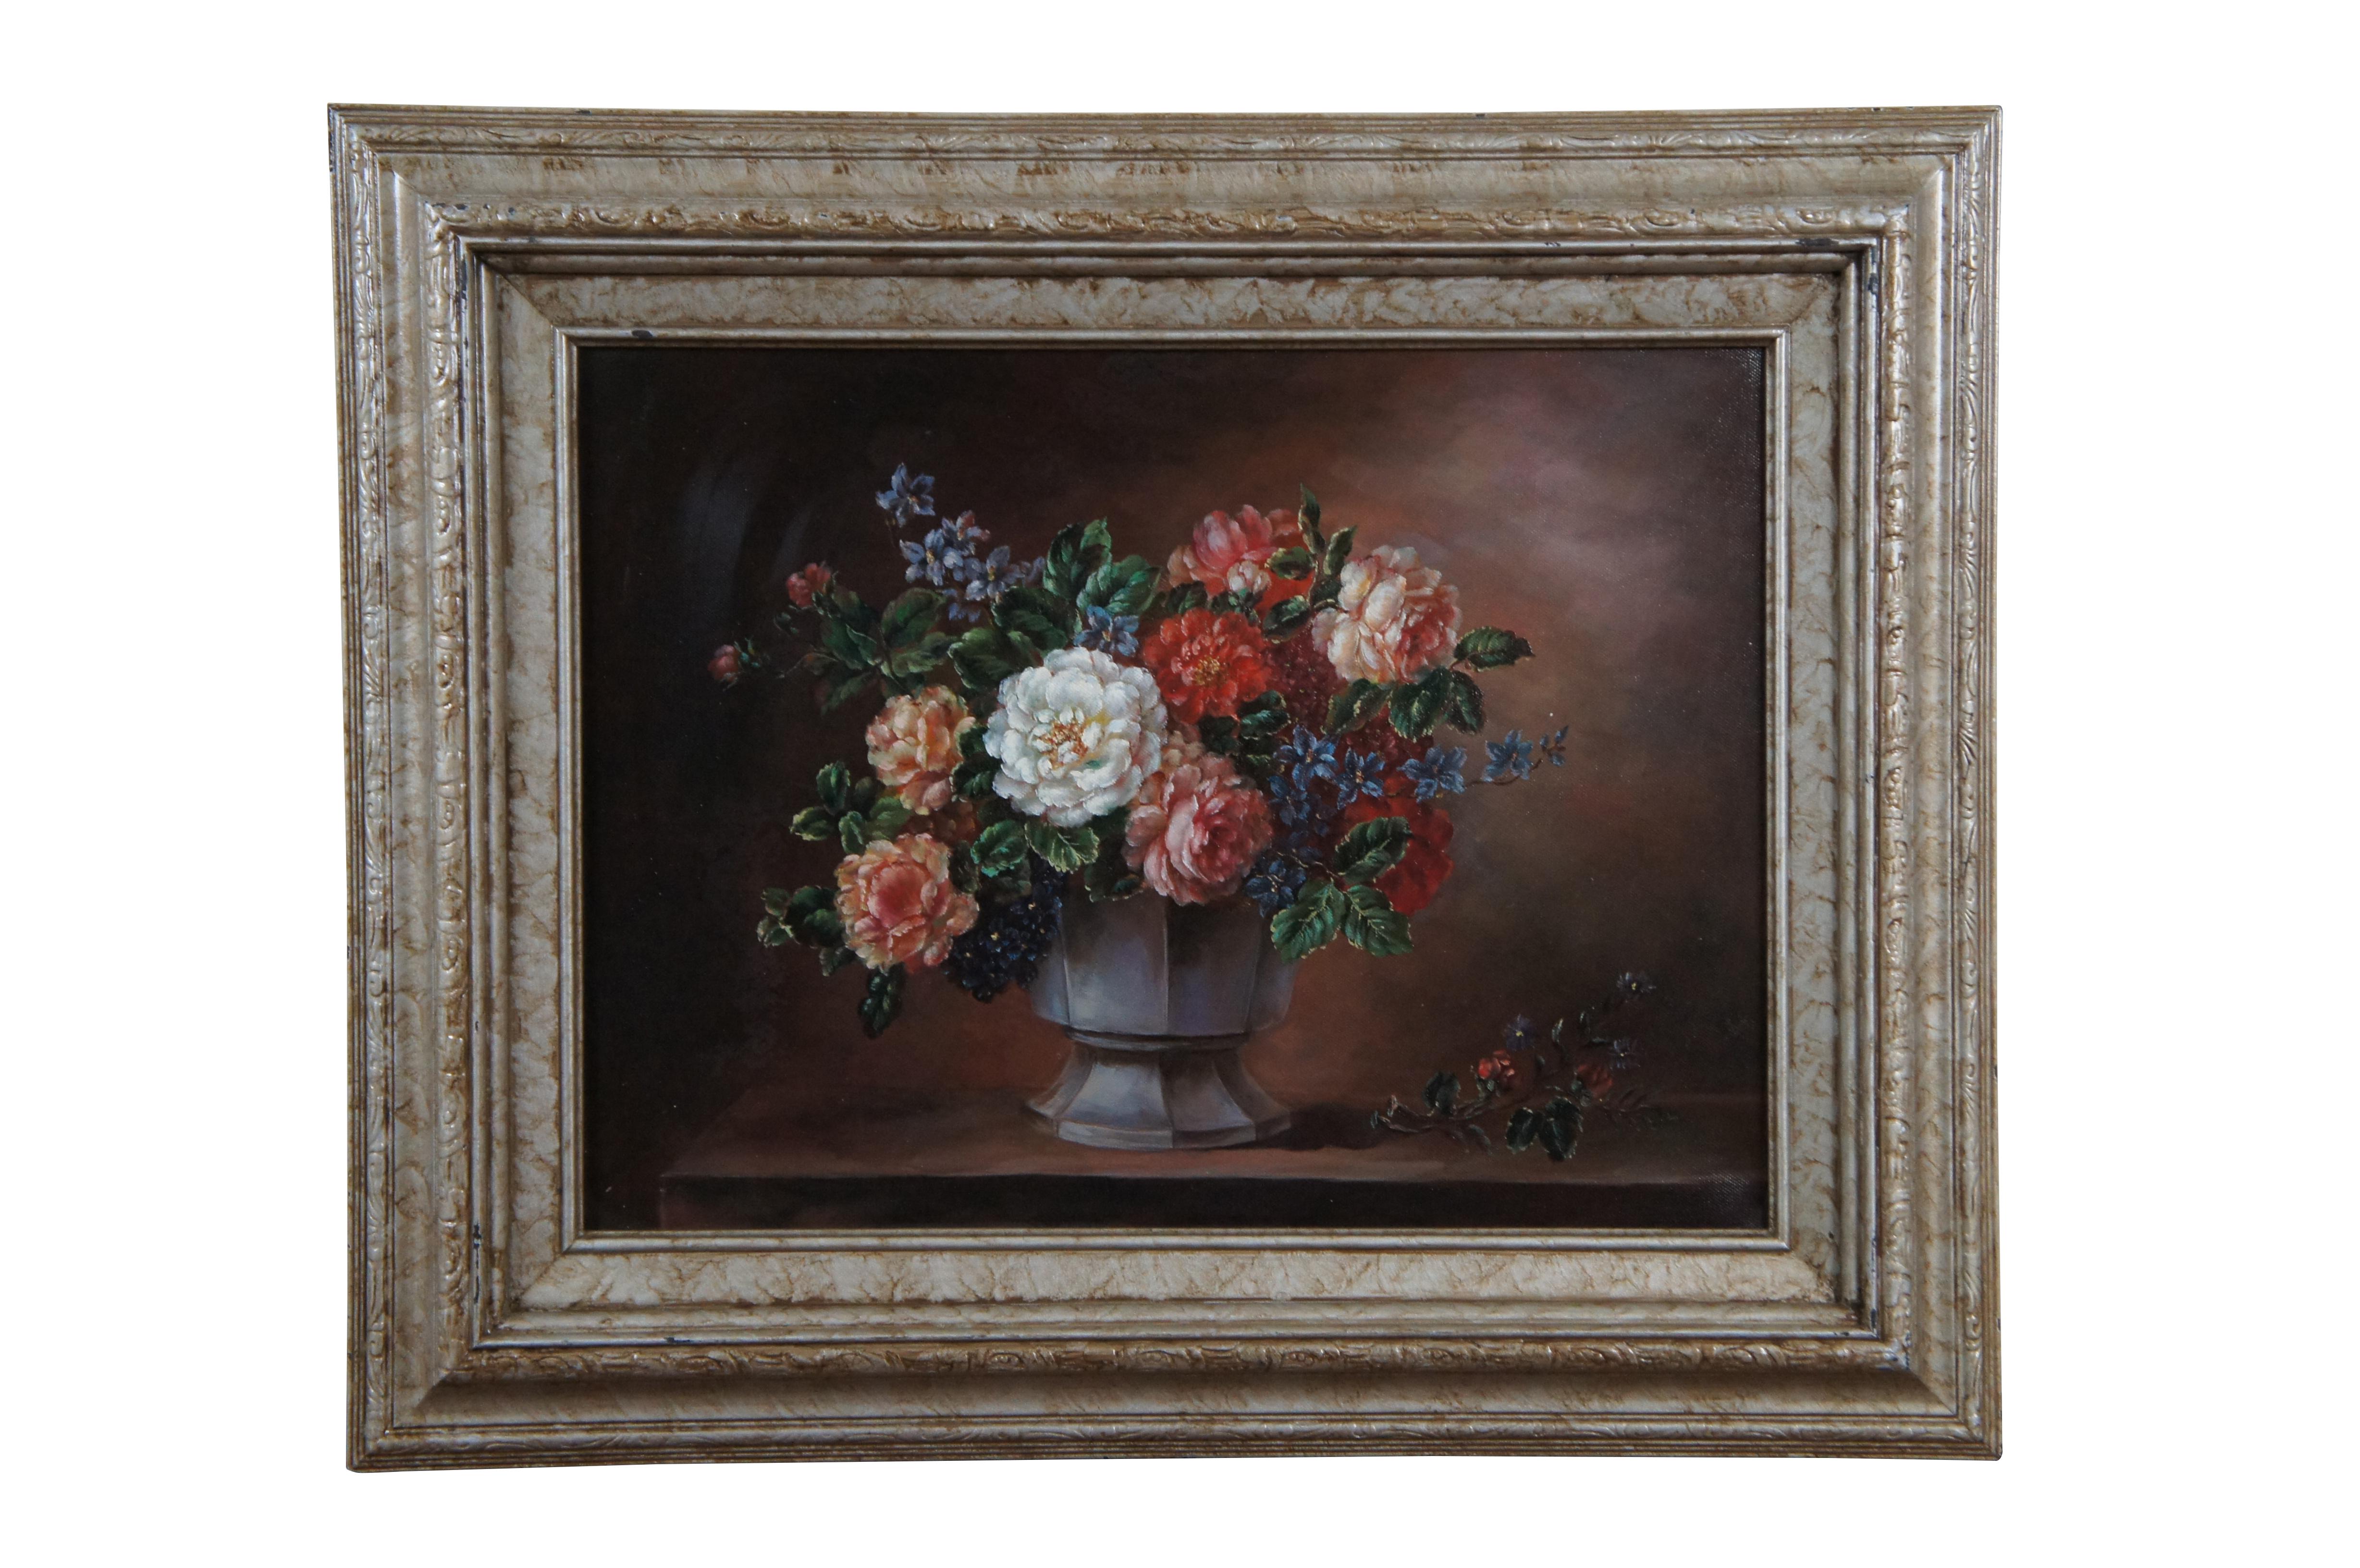 Pair of late 20th century hand painted oil on canvas still life paintings depicting bouquets of assorted flowers in vases. No signatures. Framed in marbled champagne frames with lightly carved raised bevels.

Dimensions:
21.75